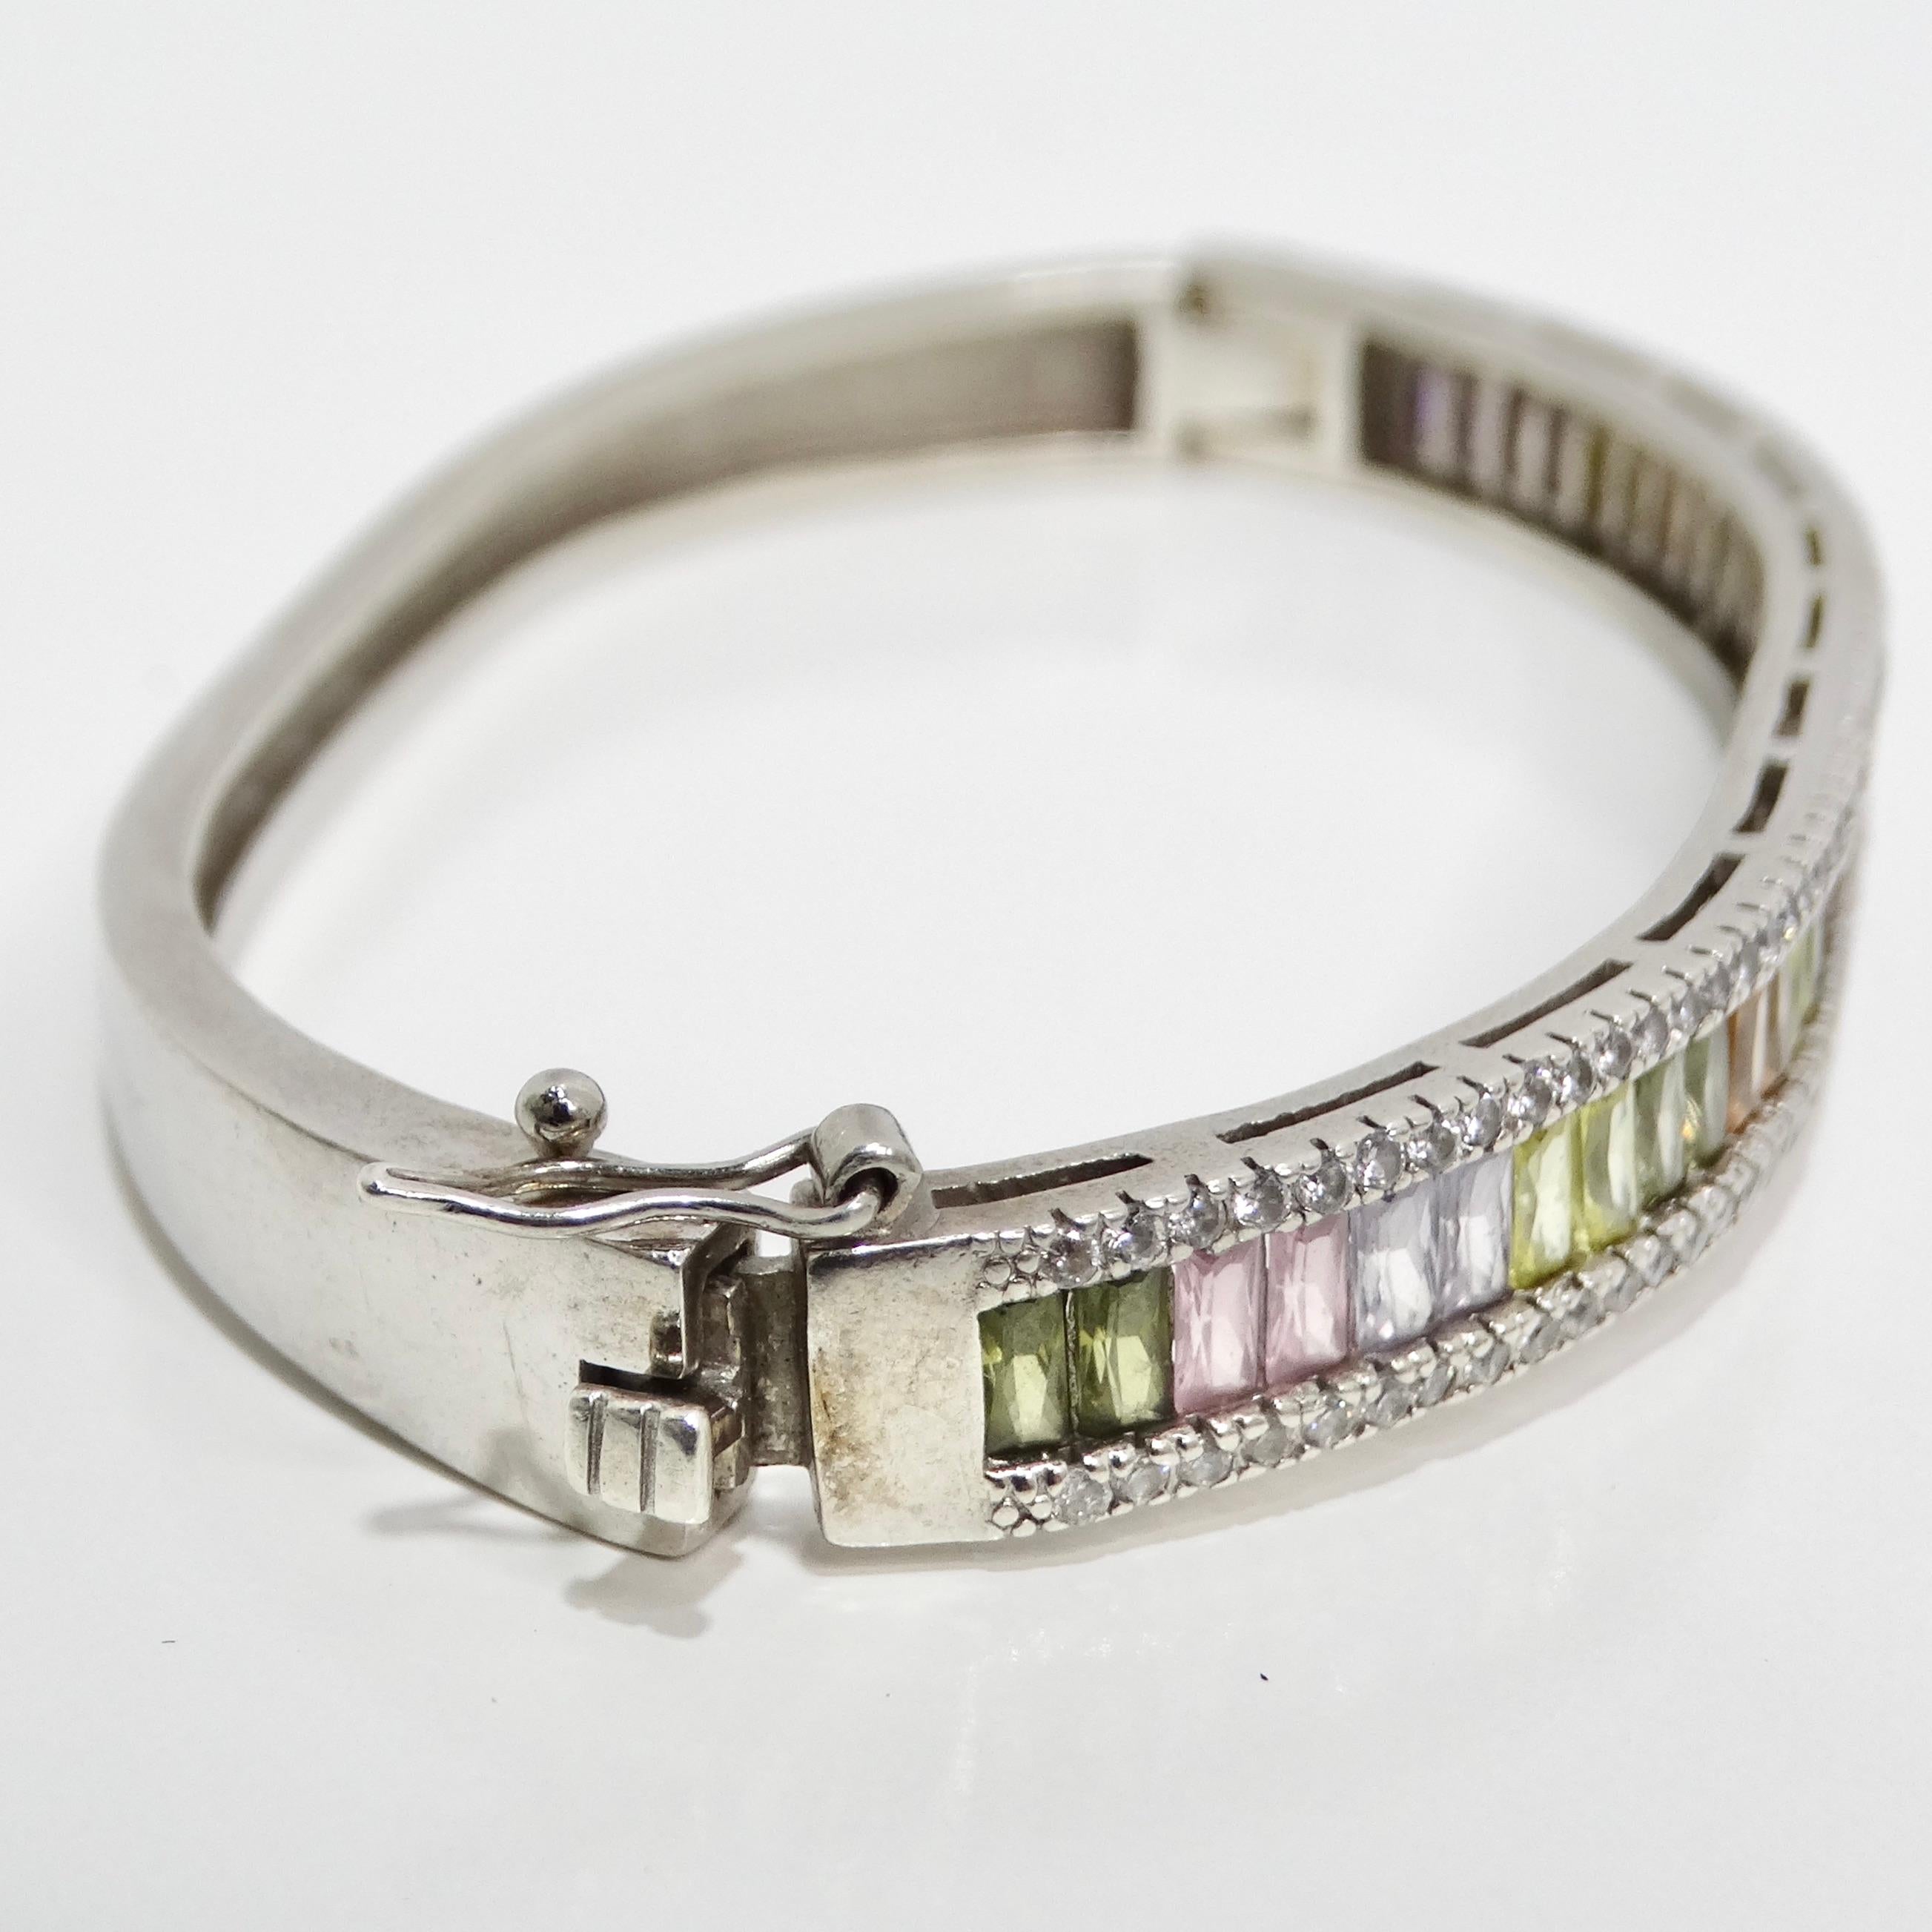 1990s with the Vintage Multicolor Rhinestone Silver Bracelet In Good Condition For Sale In Scottsdale, AZ